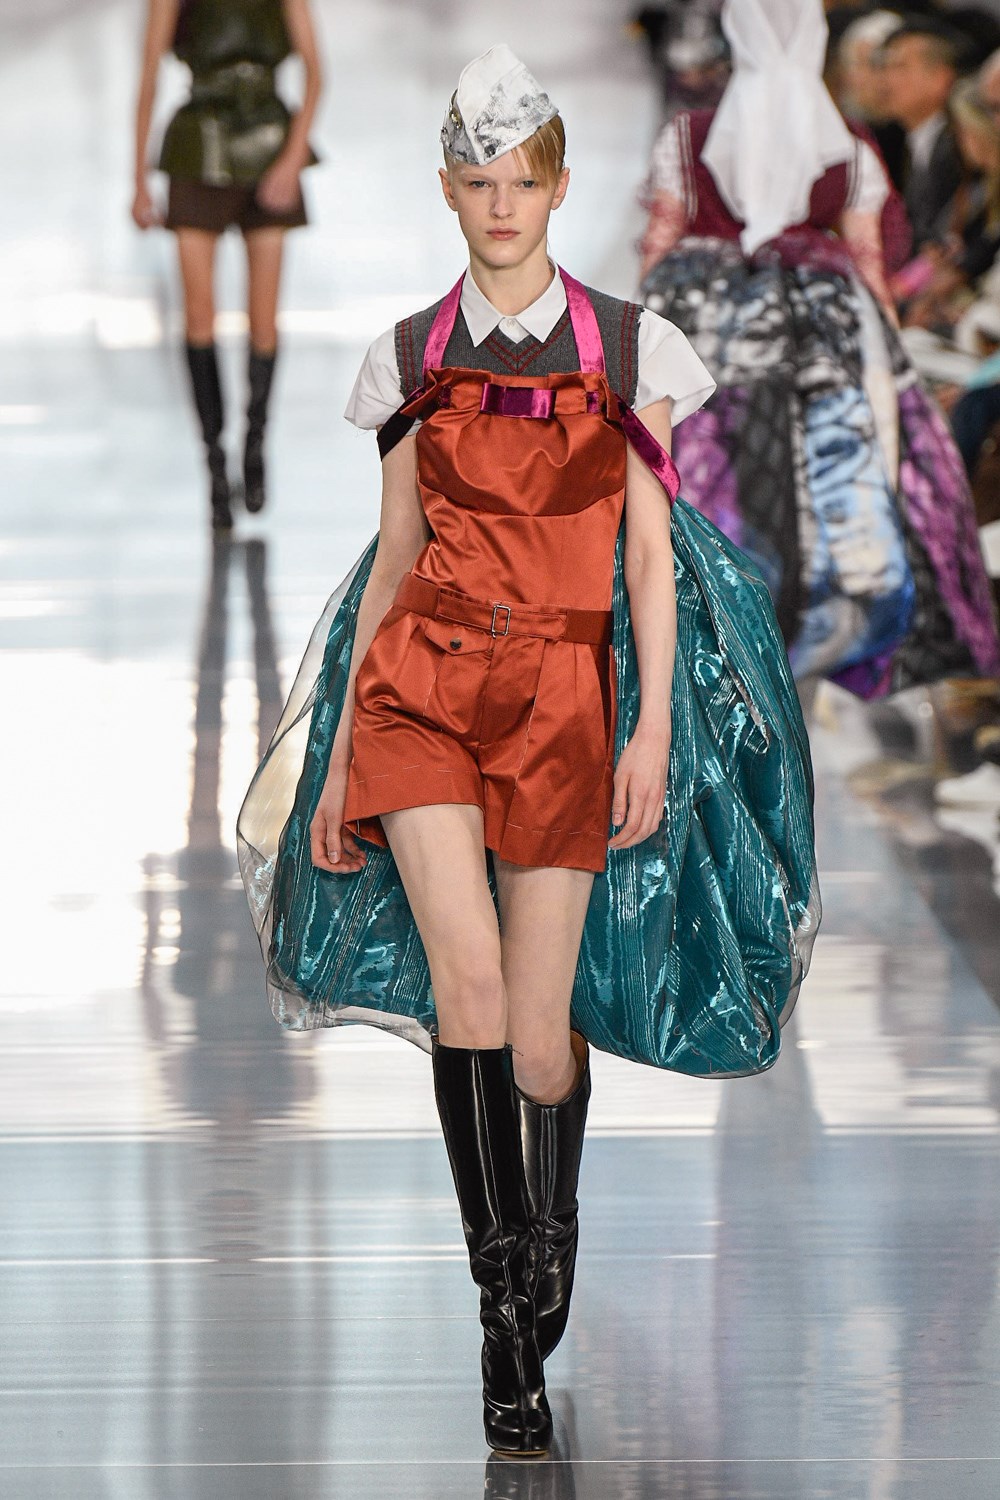 Top 20 Most Popular Runway Models of Spring 2020 | The Impression